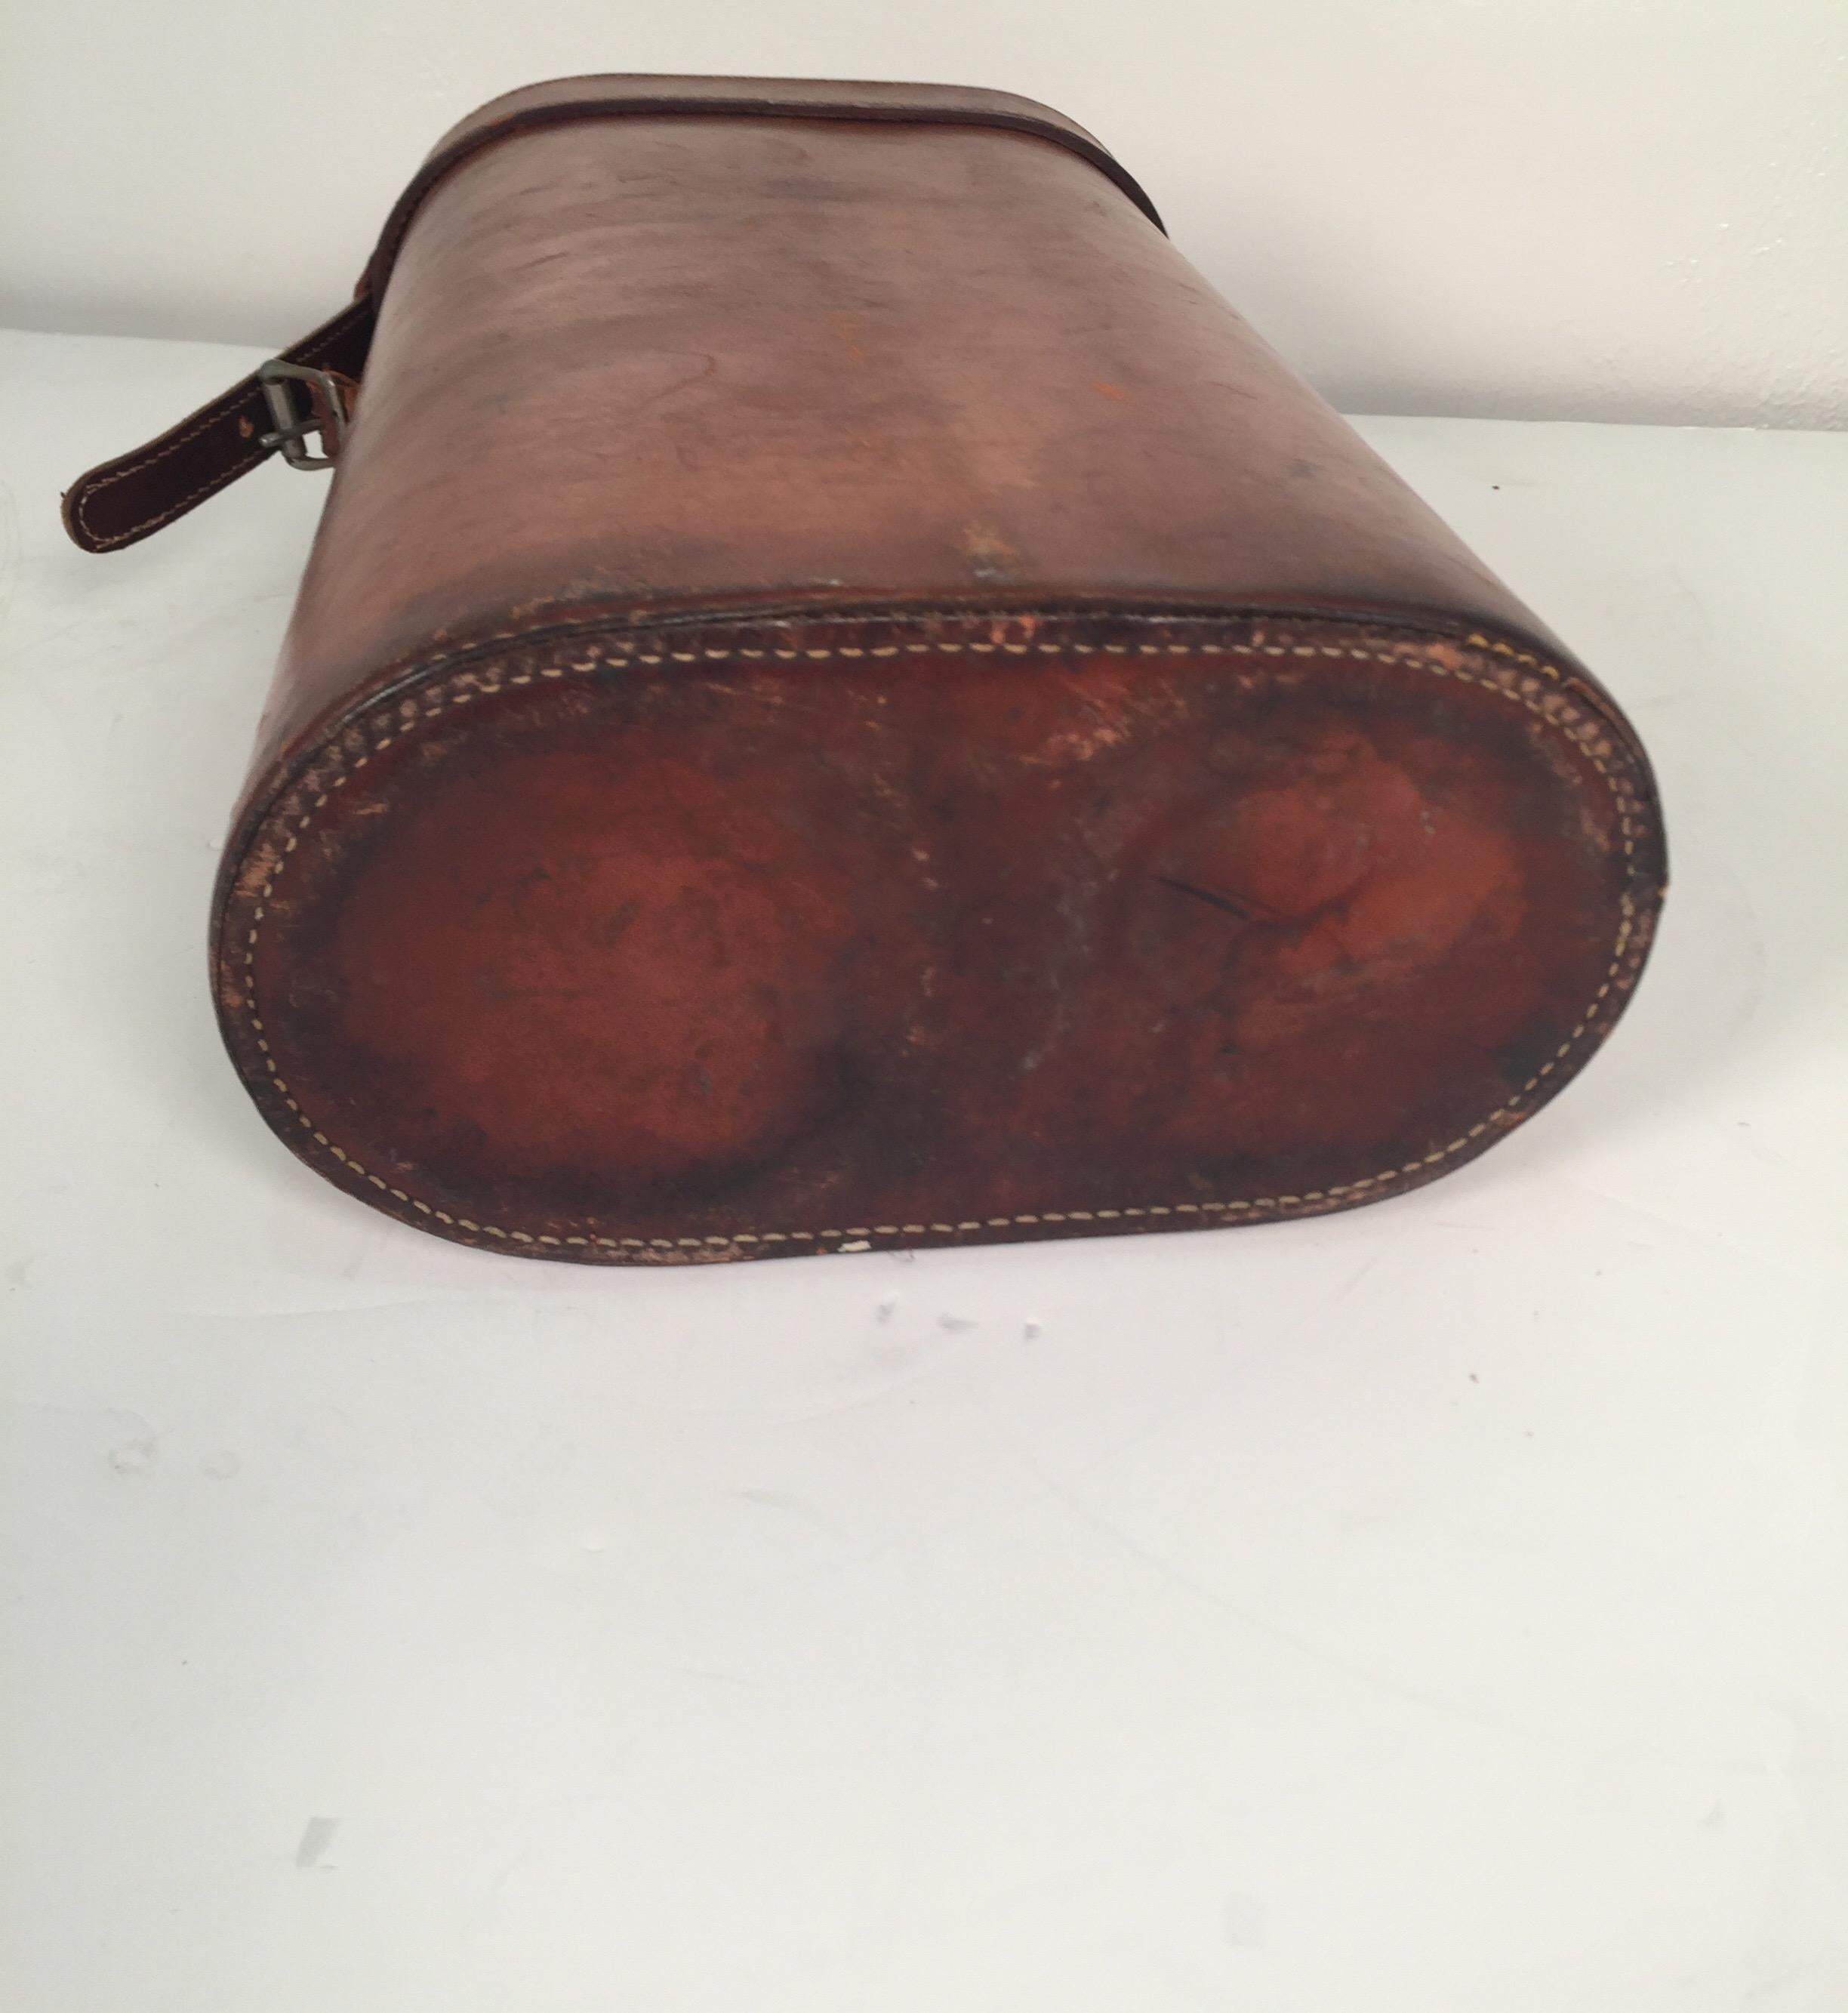 Vintage Leather Two Bottle Wine Carrier, circa 1940s-1950s 5